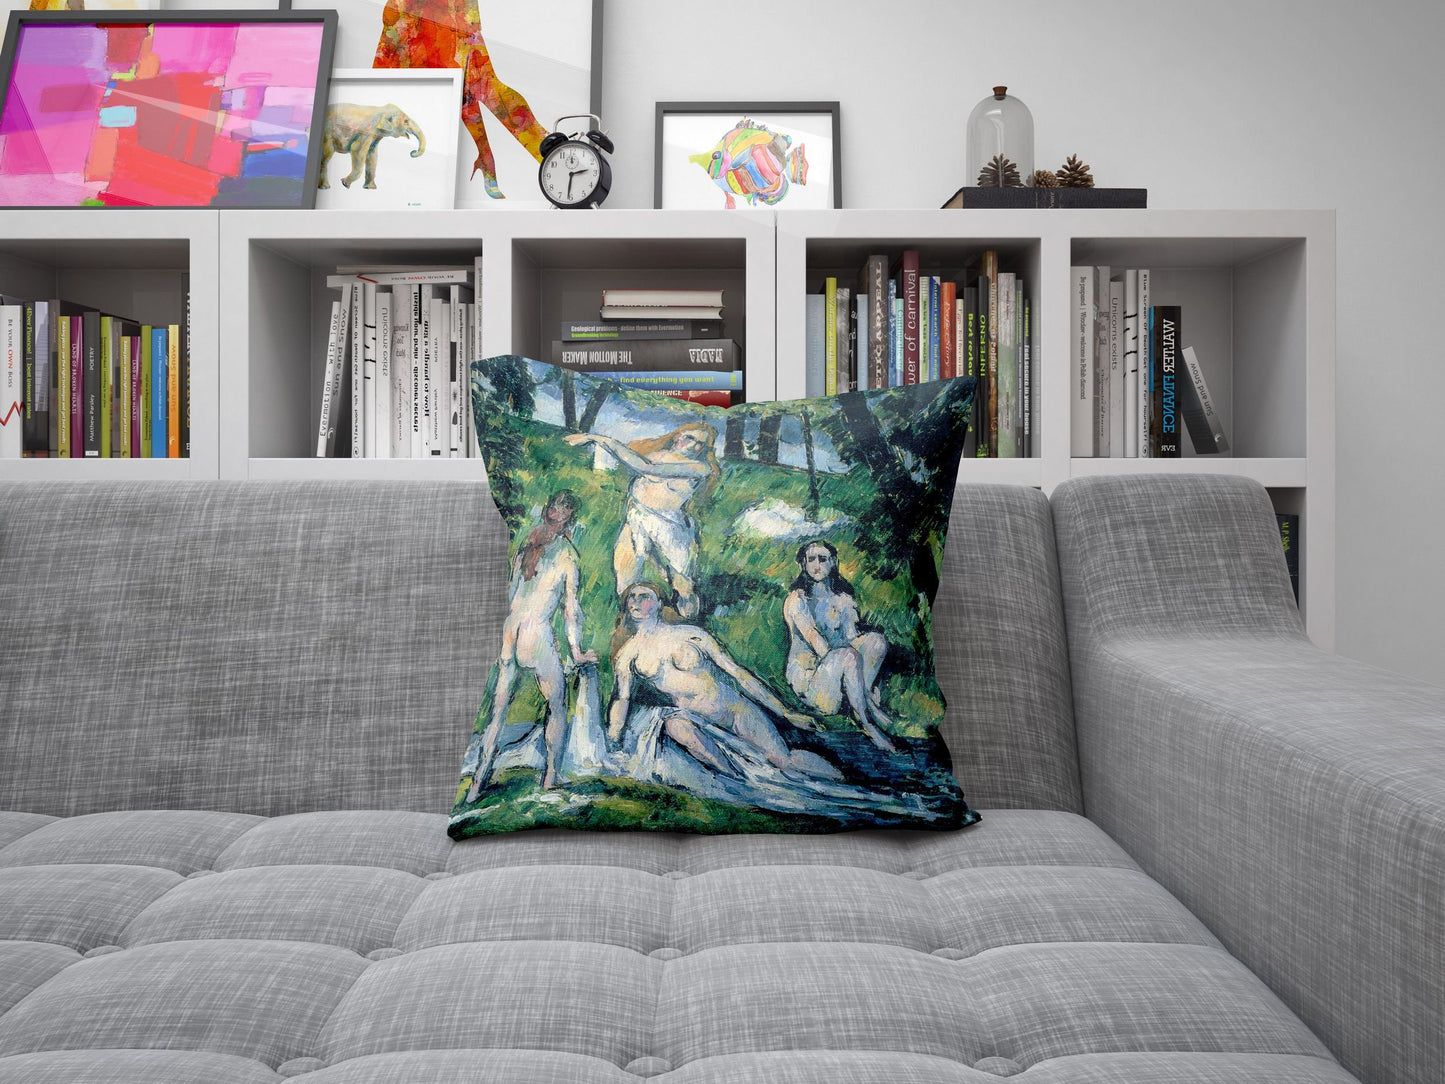 Paul Cezanne Famous Art, Decorative Pillow, Abstract Throw Pillow Cover, Green And Blue, Contemporary Pillow, Large Pillow Cases